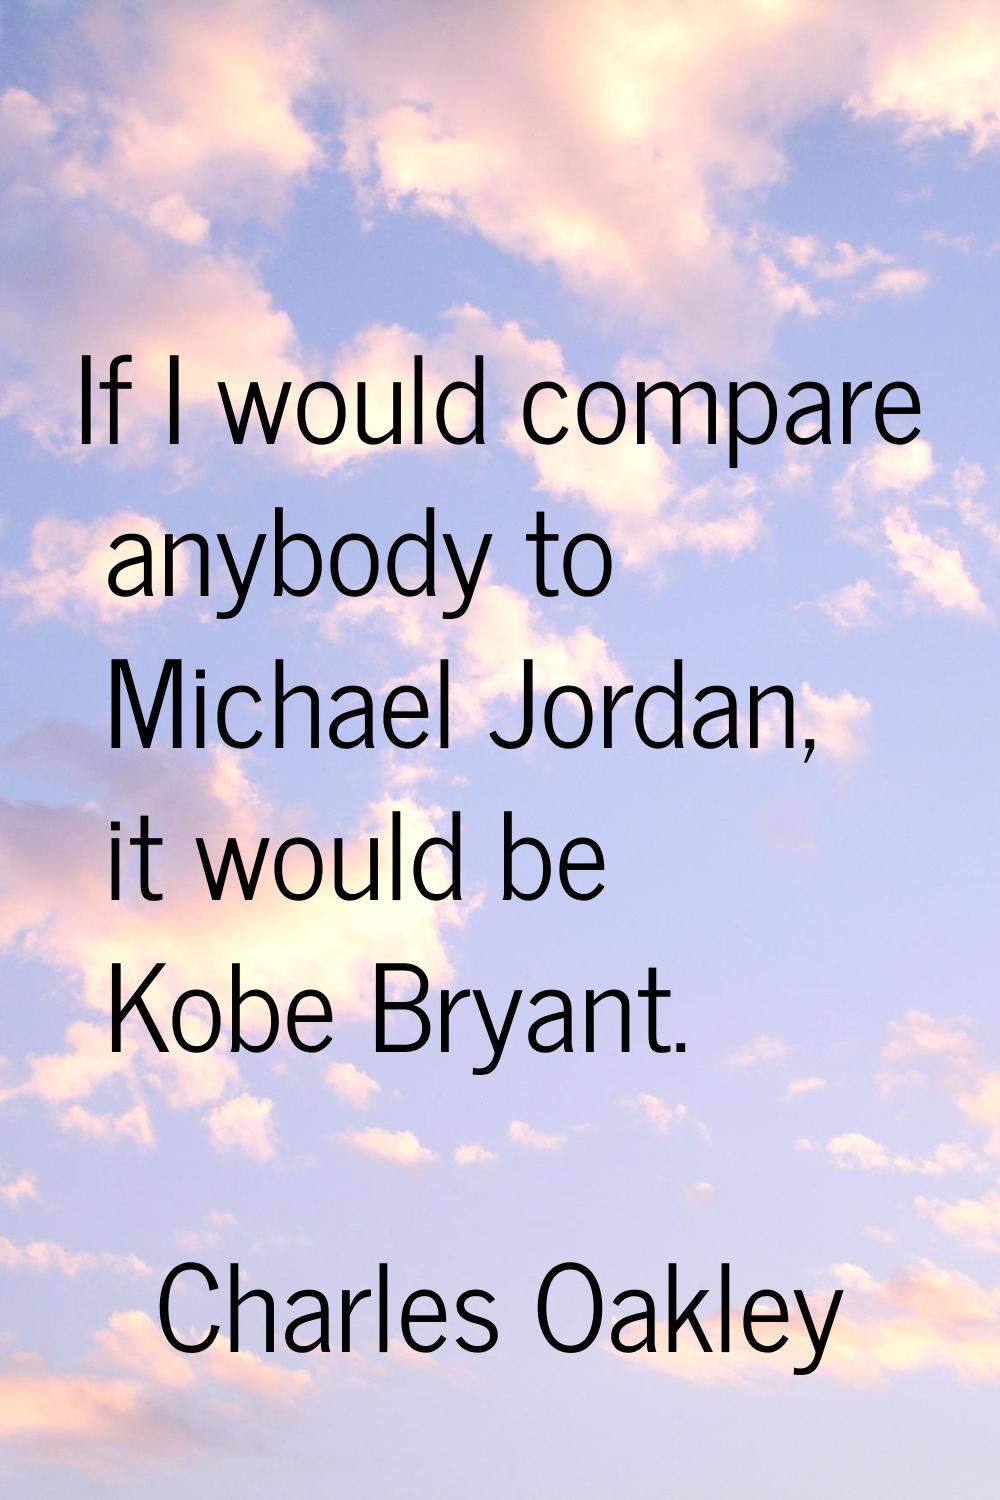 If I would compare anybody to Michael Jordan, it would be Kobe Bryant.